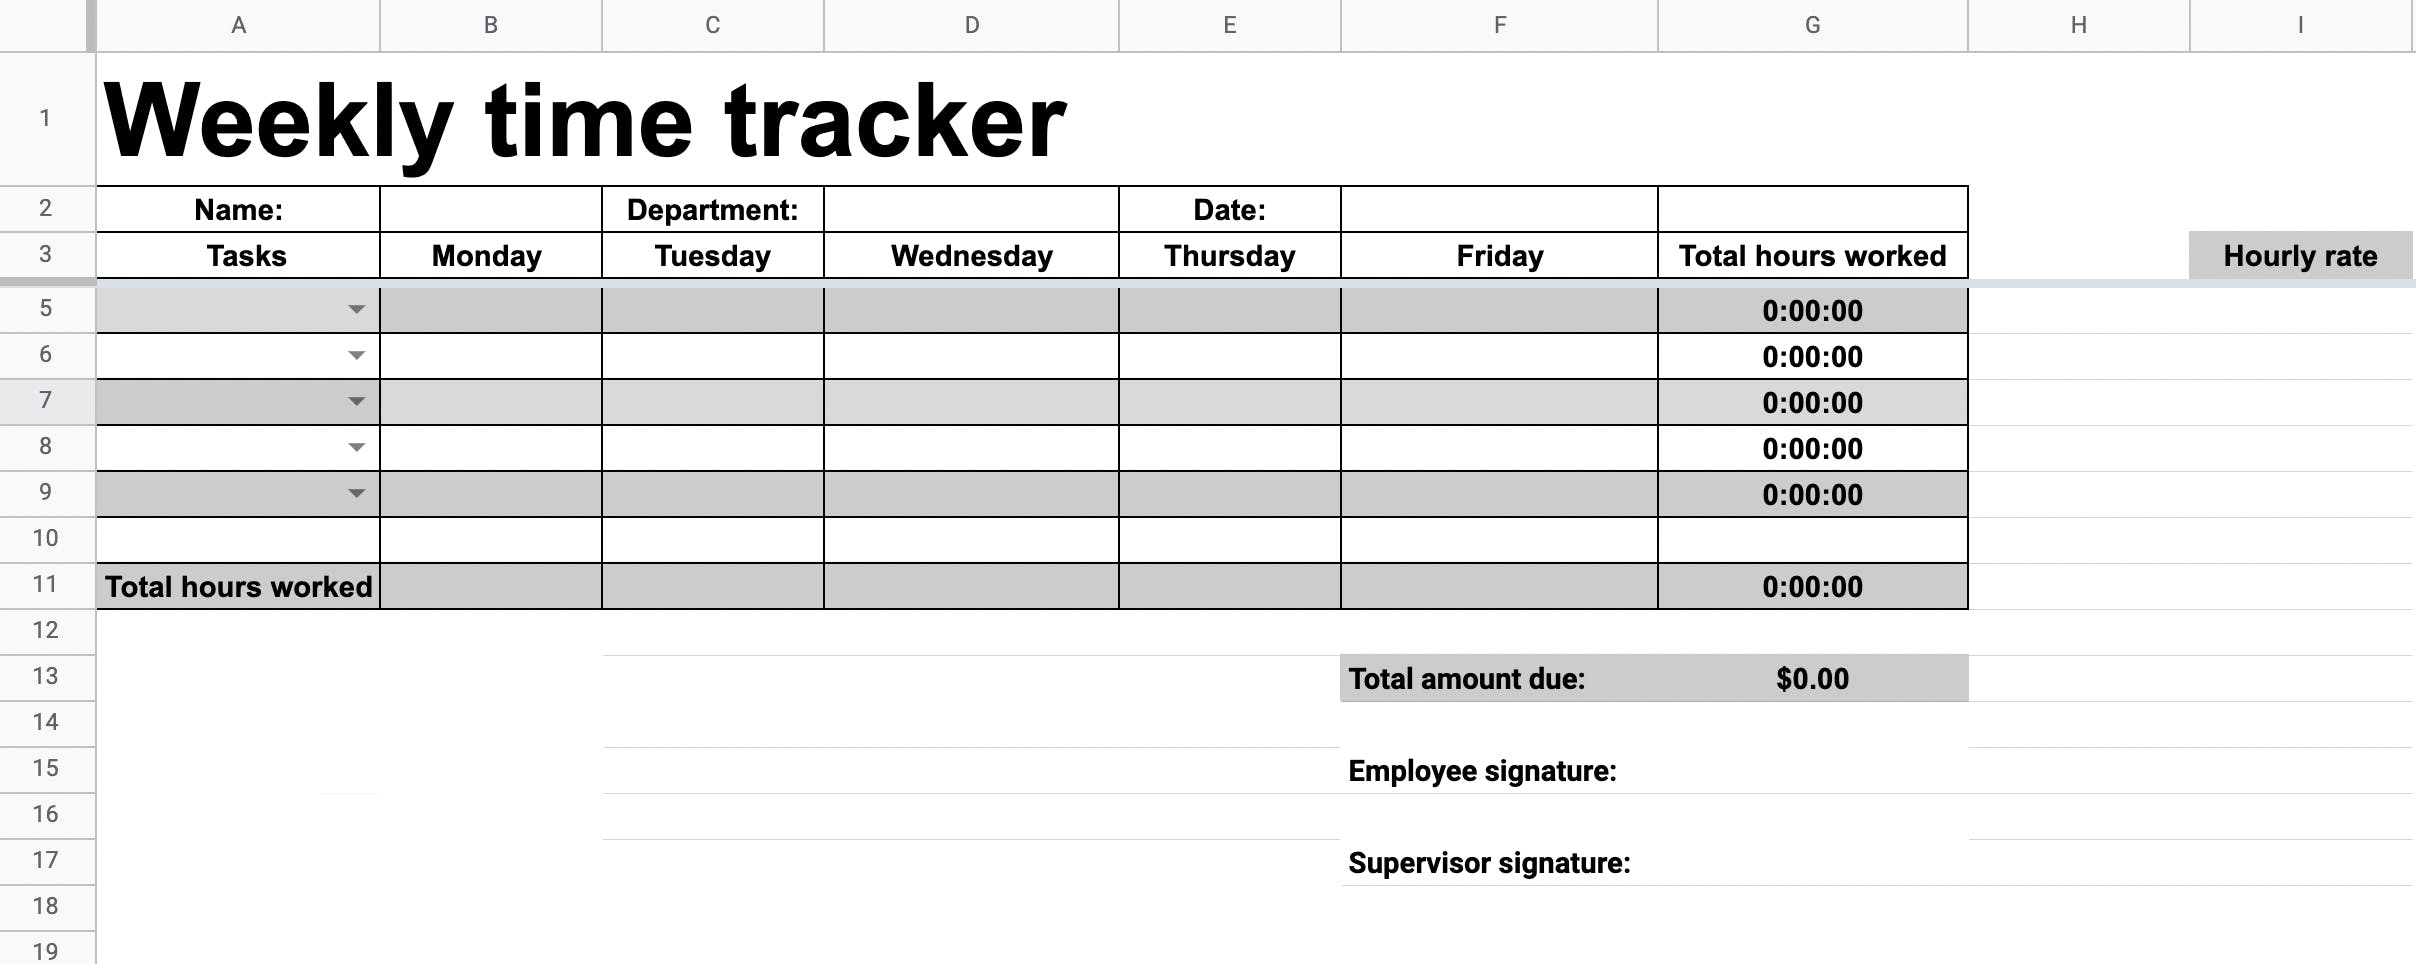 excel timesheet templates